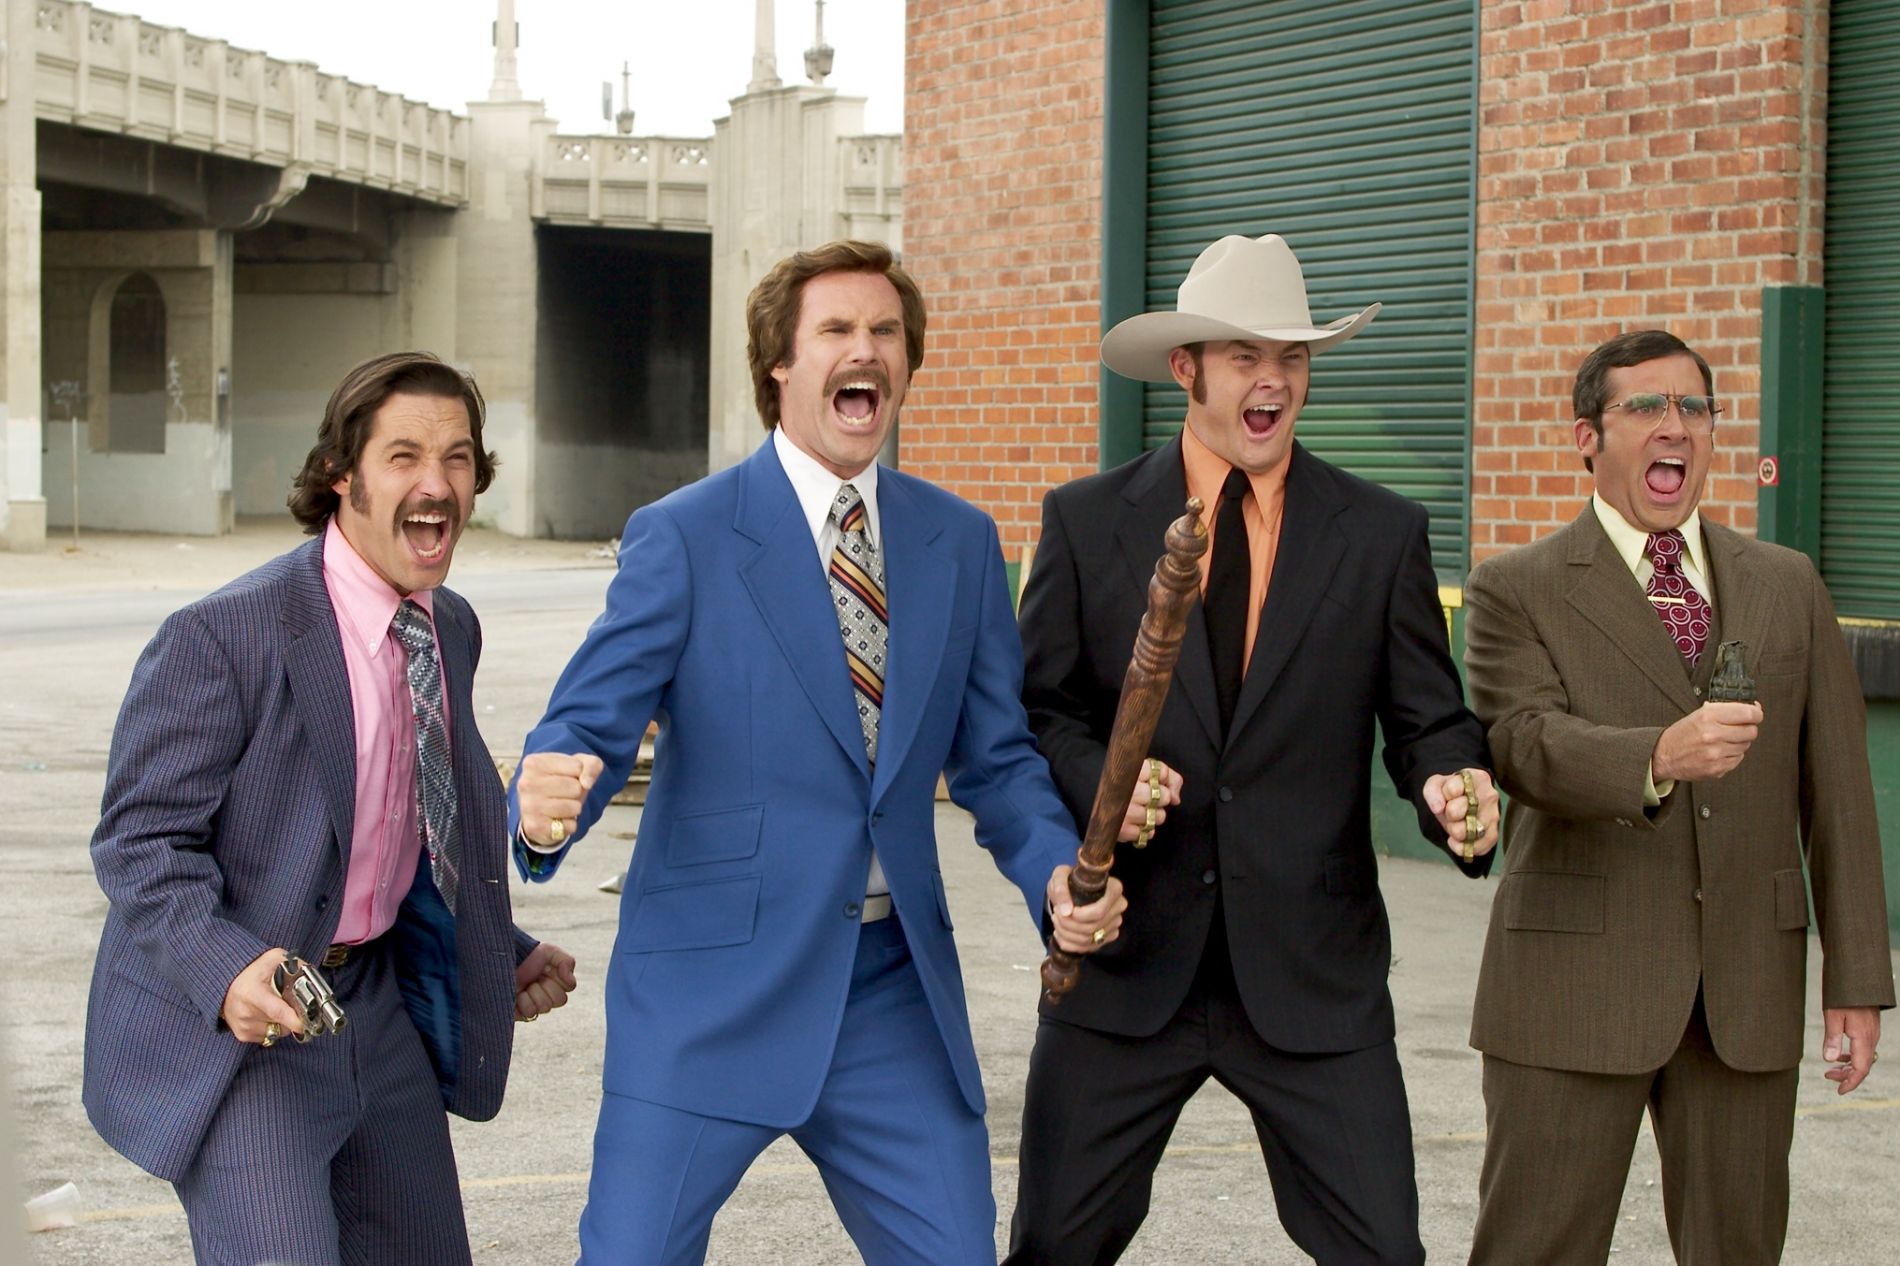 Paul Rudd, Will Ferrell, David Koechner and Steve Carell as they appeared in a scene of Anchorman